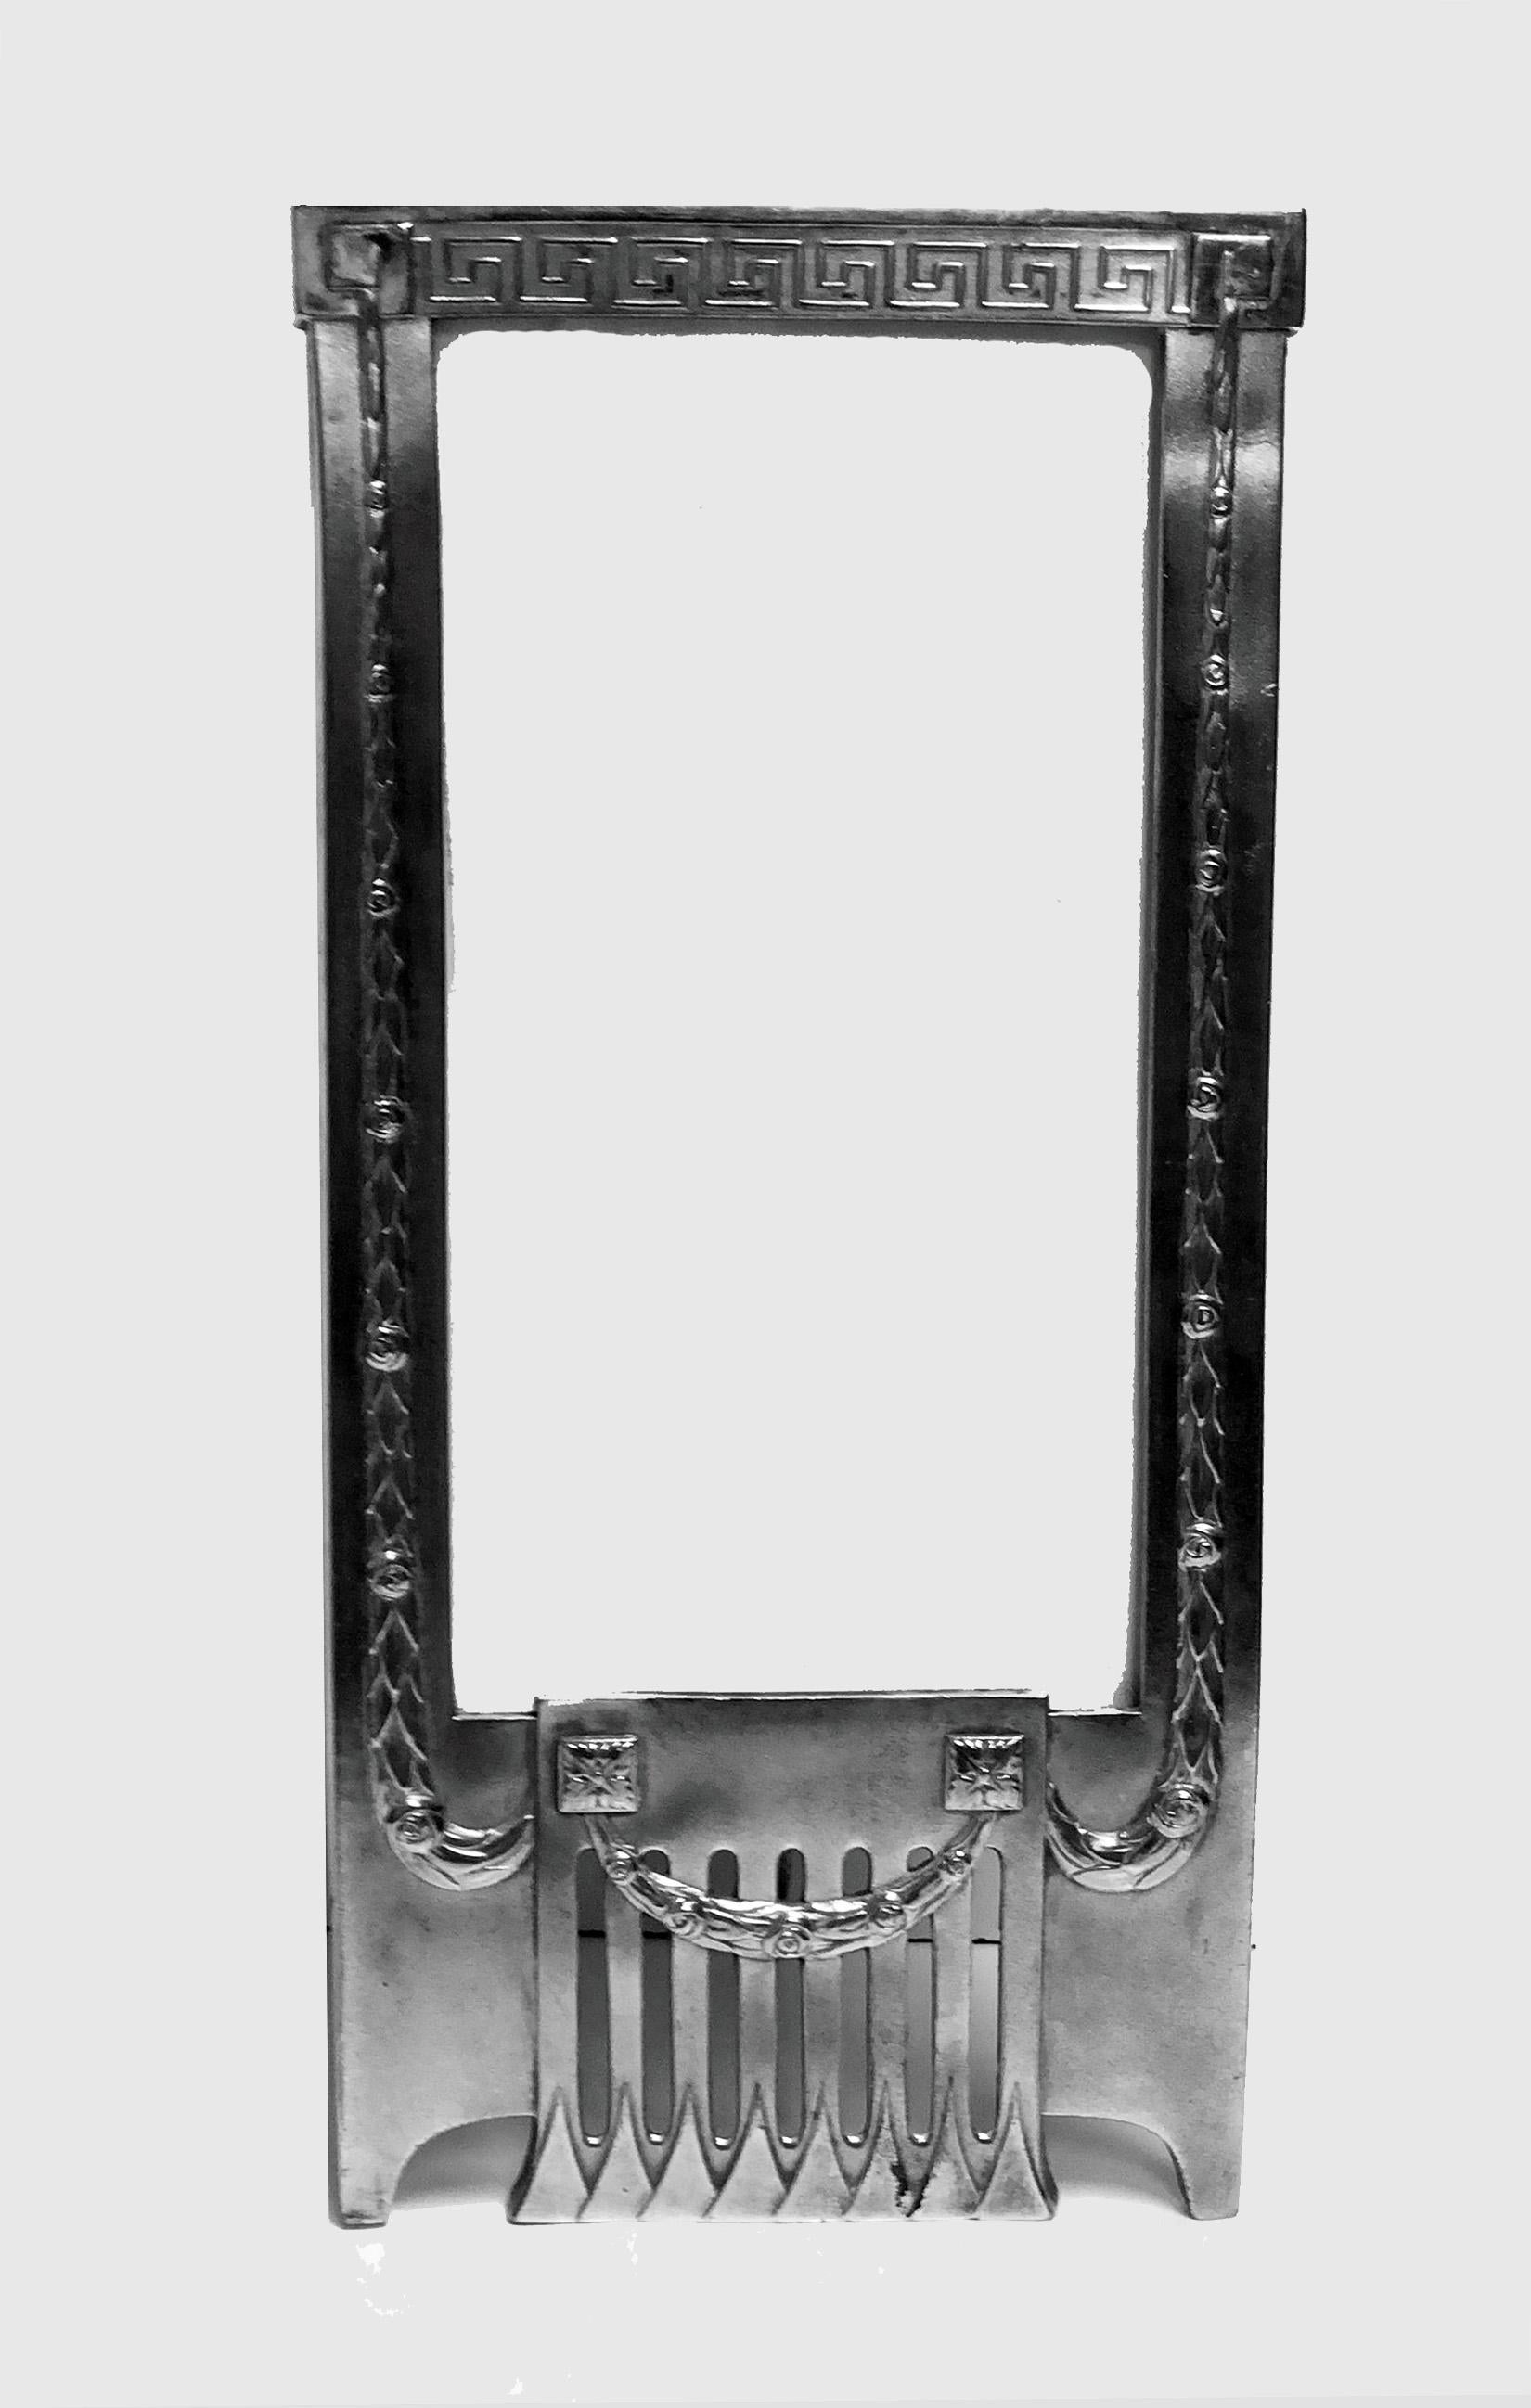 WMF Jugendstil Art Nouveau Secessionist Photograph Frame, Germany C.1905. The rare design pewter frame of horizontal rectangular shape with elongated open panel triangular panel lower frieze, the surround of frame festoon wreath and greek key